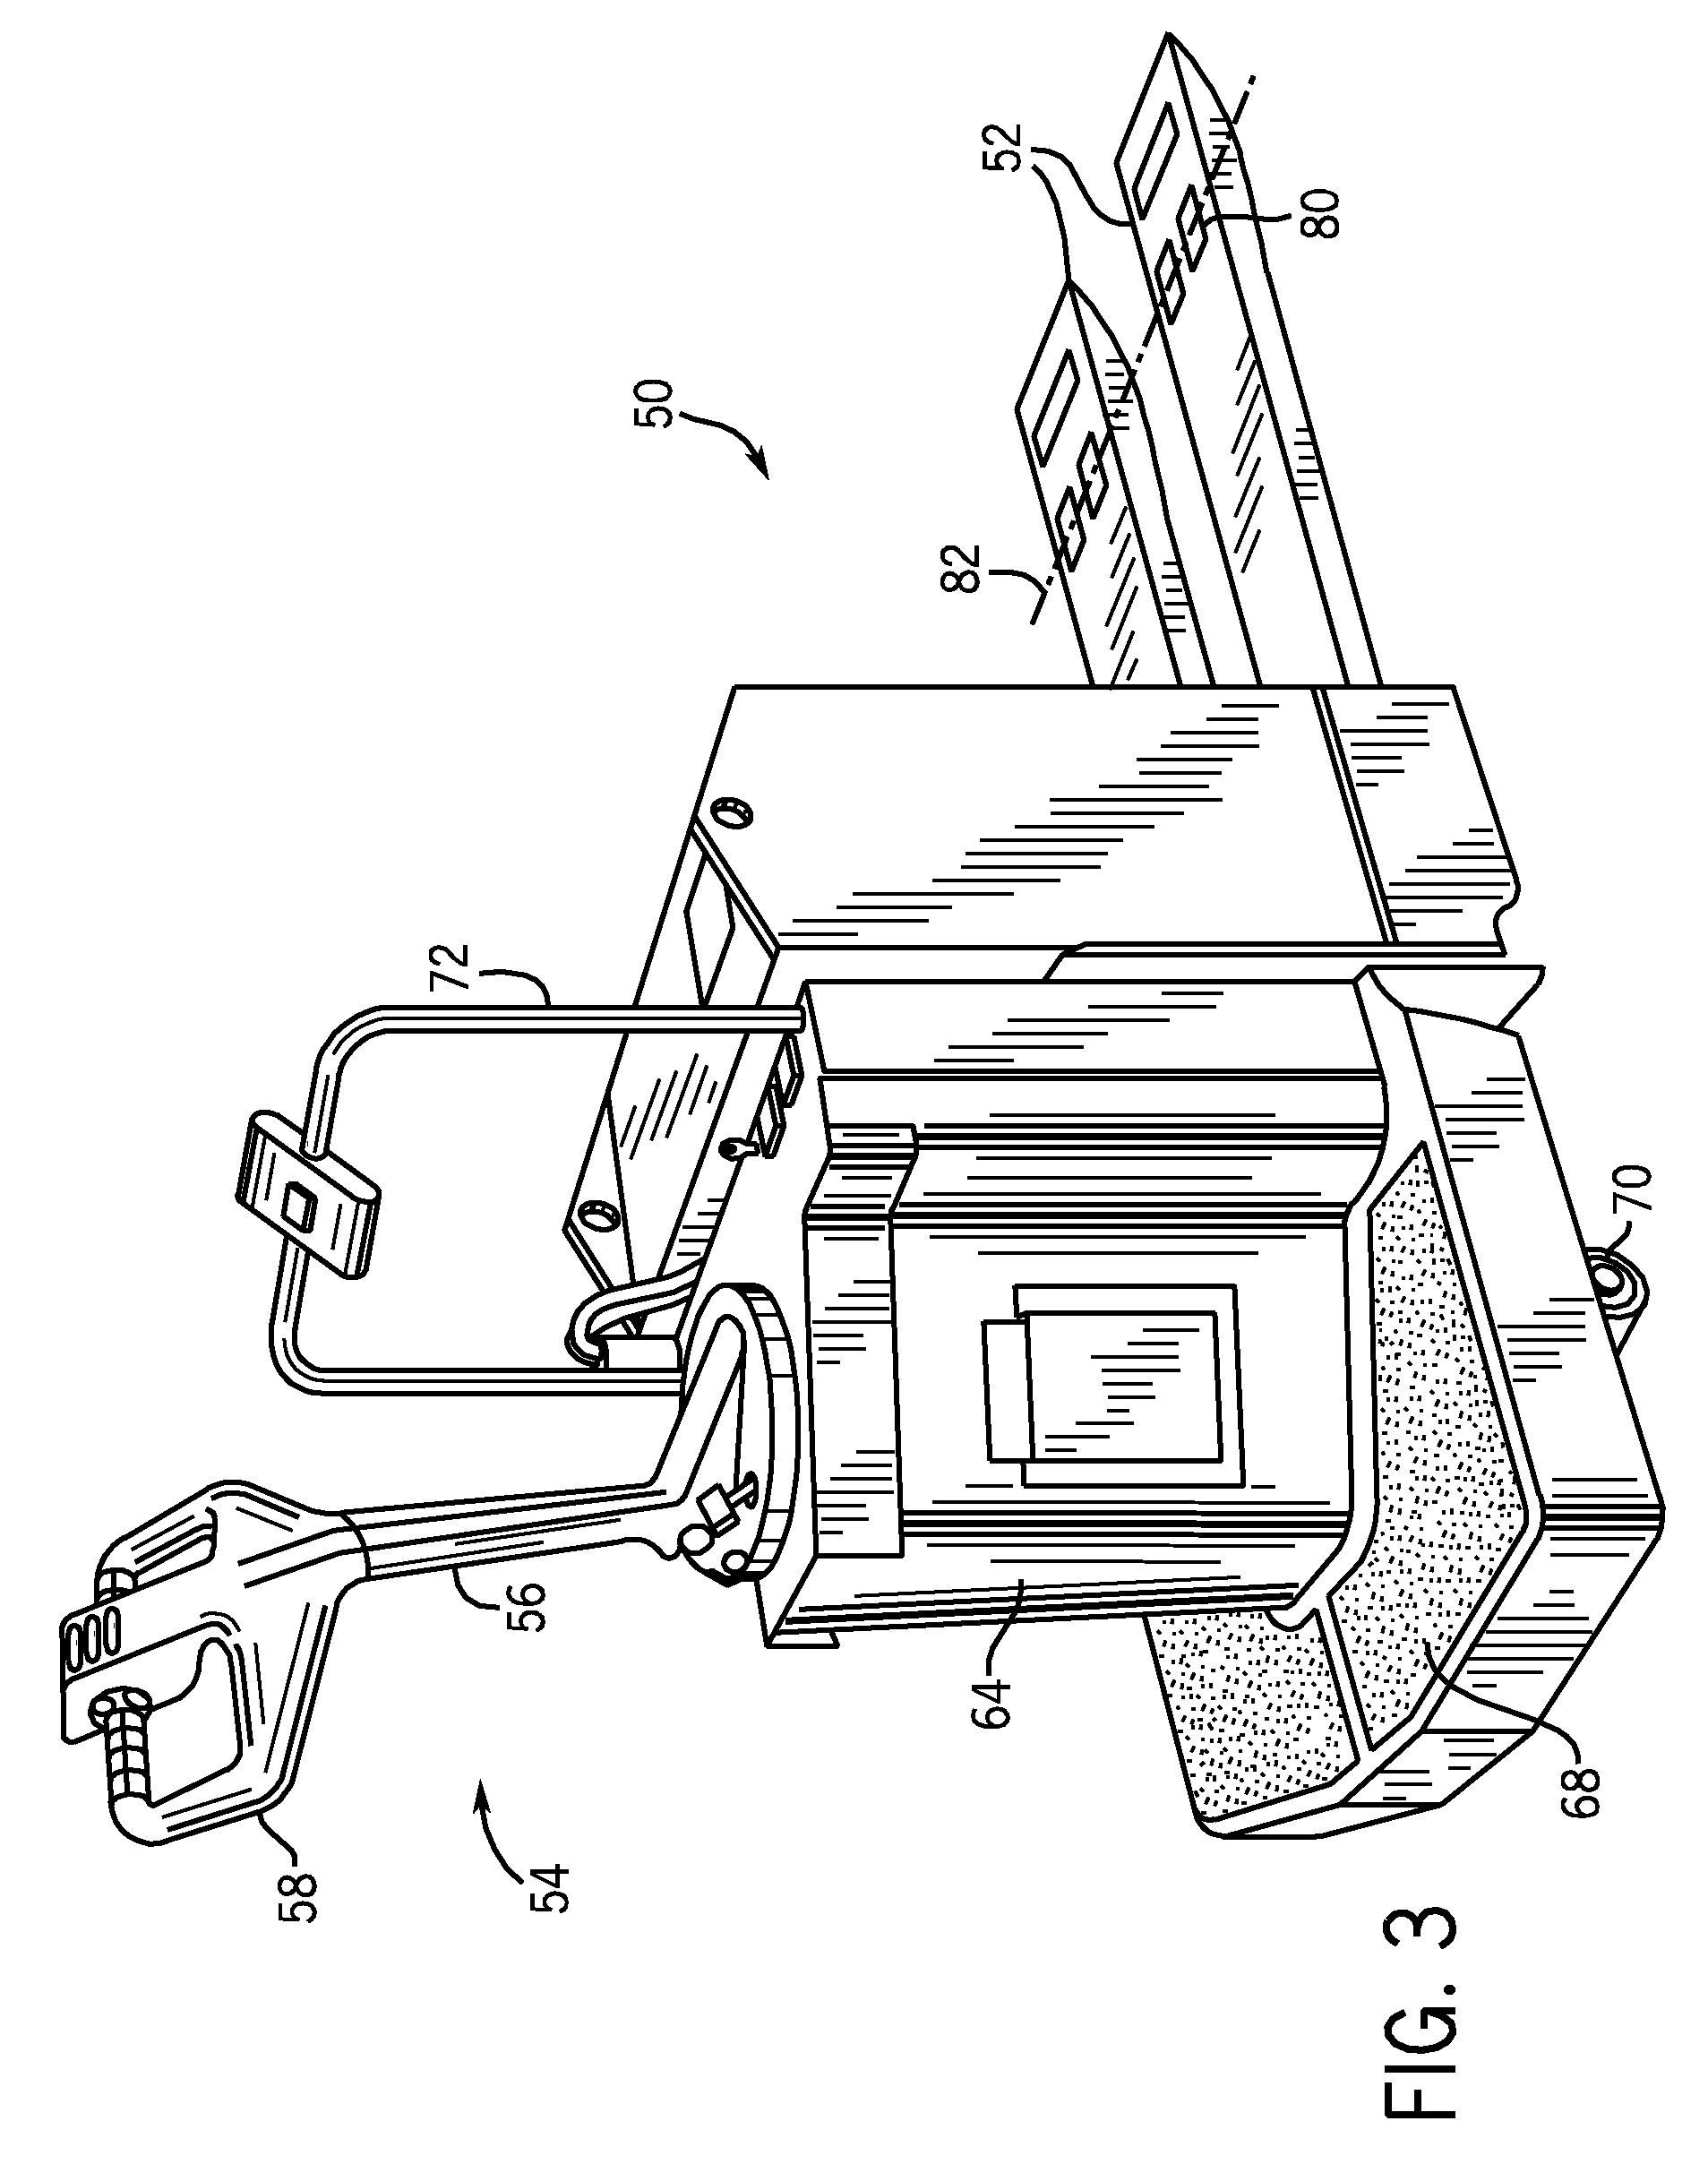 Turn stability systems and methods for lift trucks